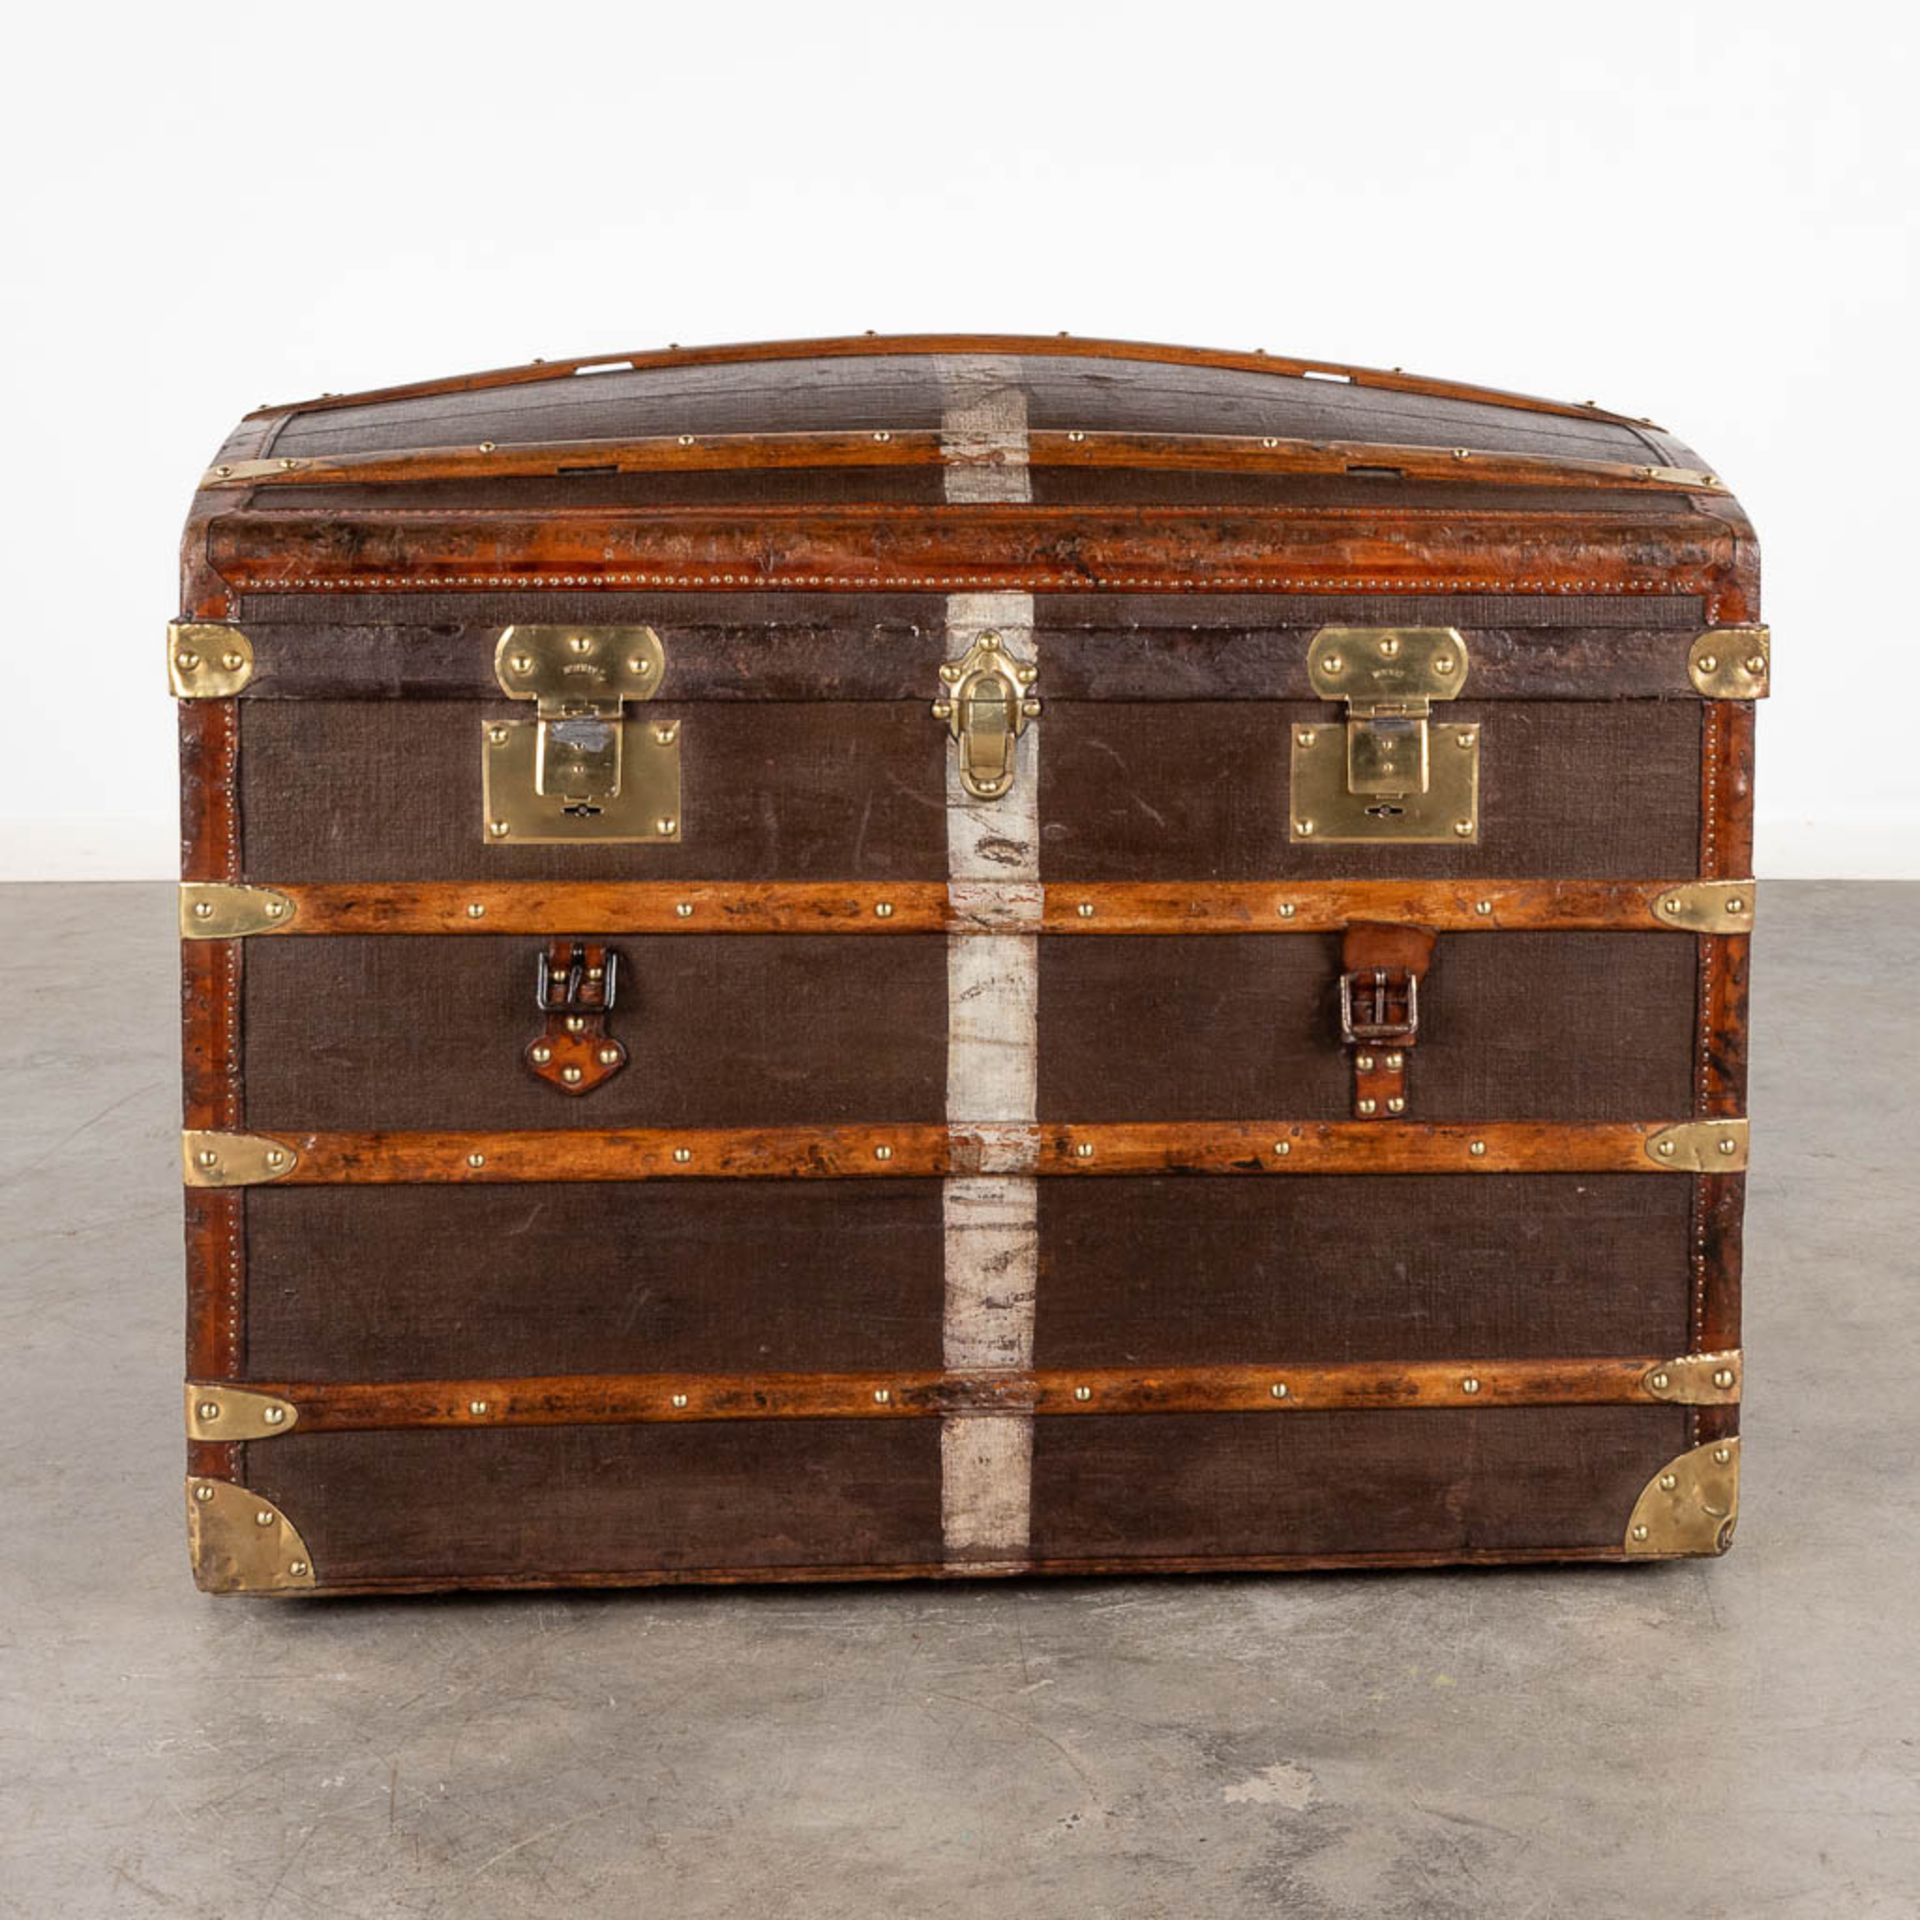 Moynat, an antique travellers trunk or suitcase. (D:58 x W:92 x H:72 cm) - Image 4 of 20